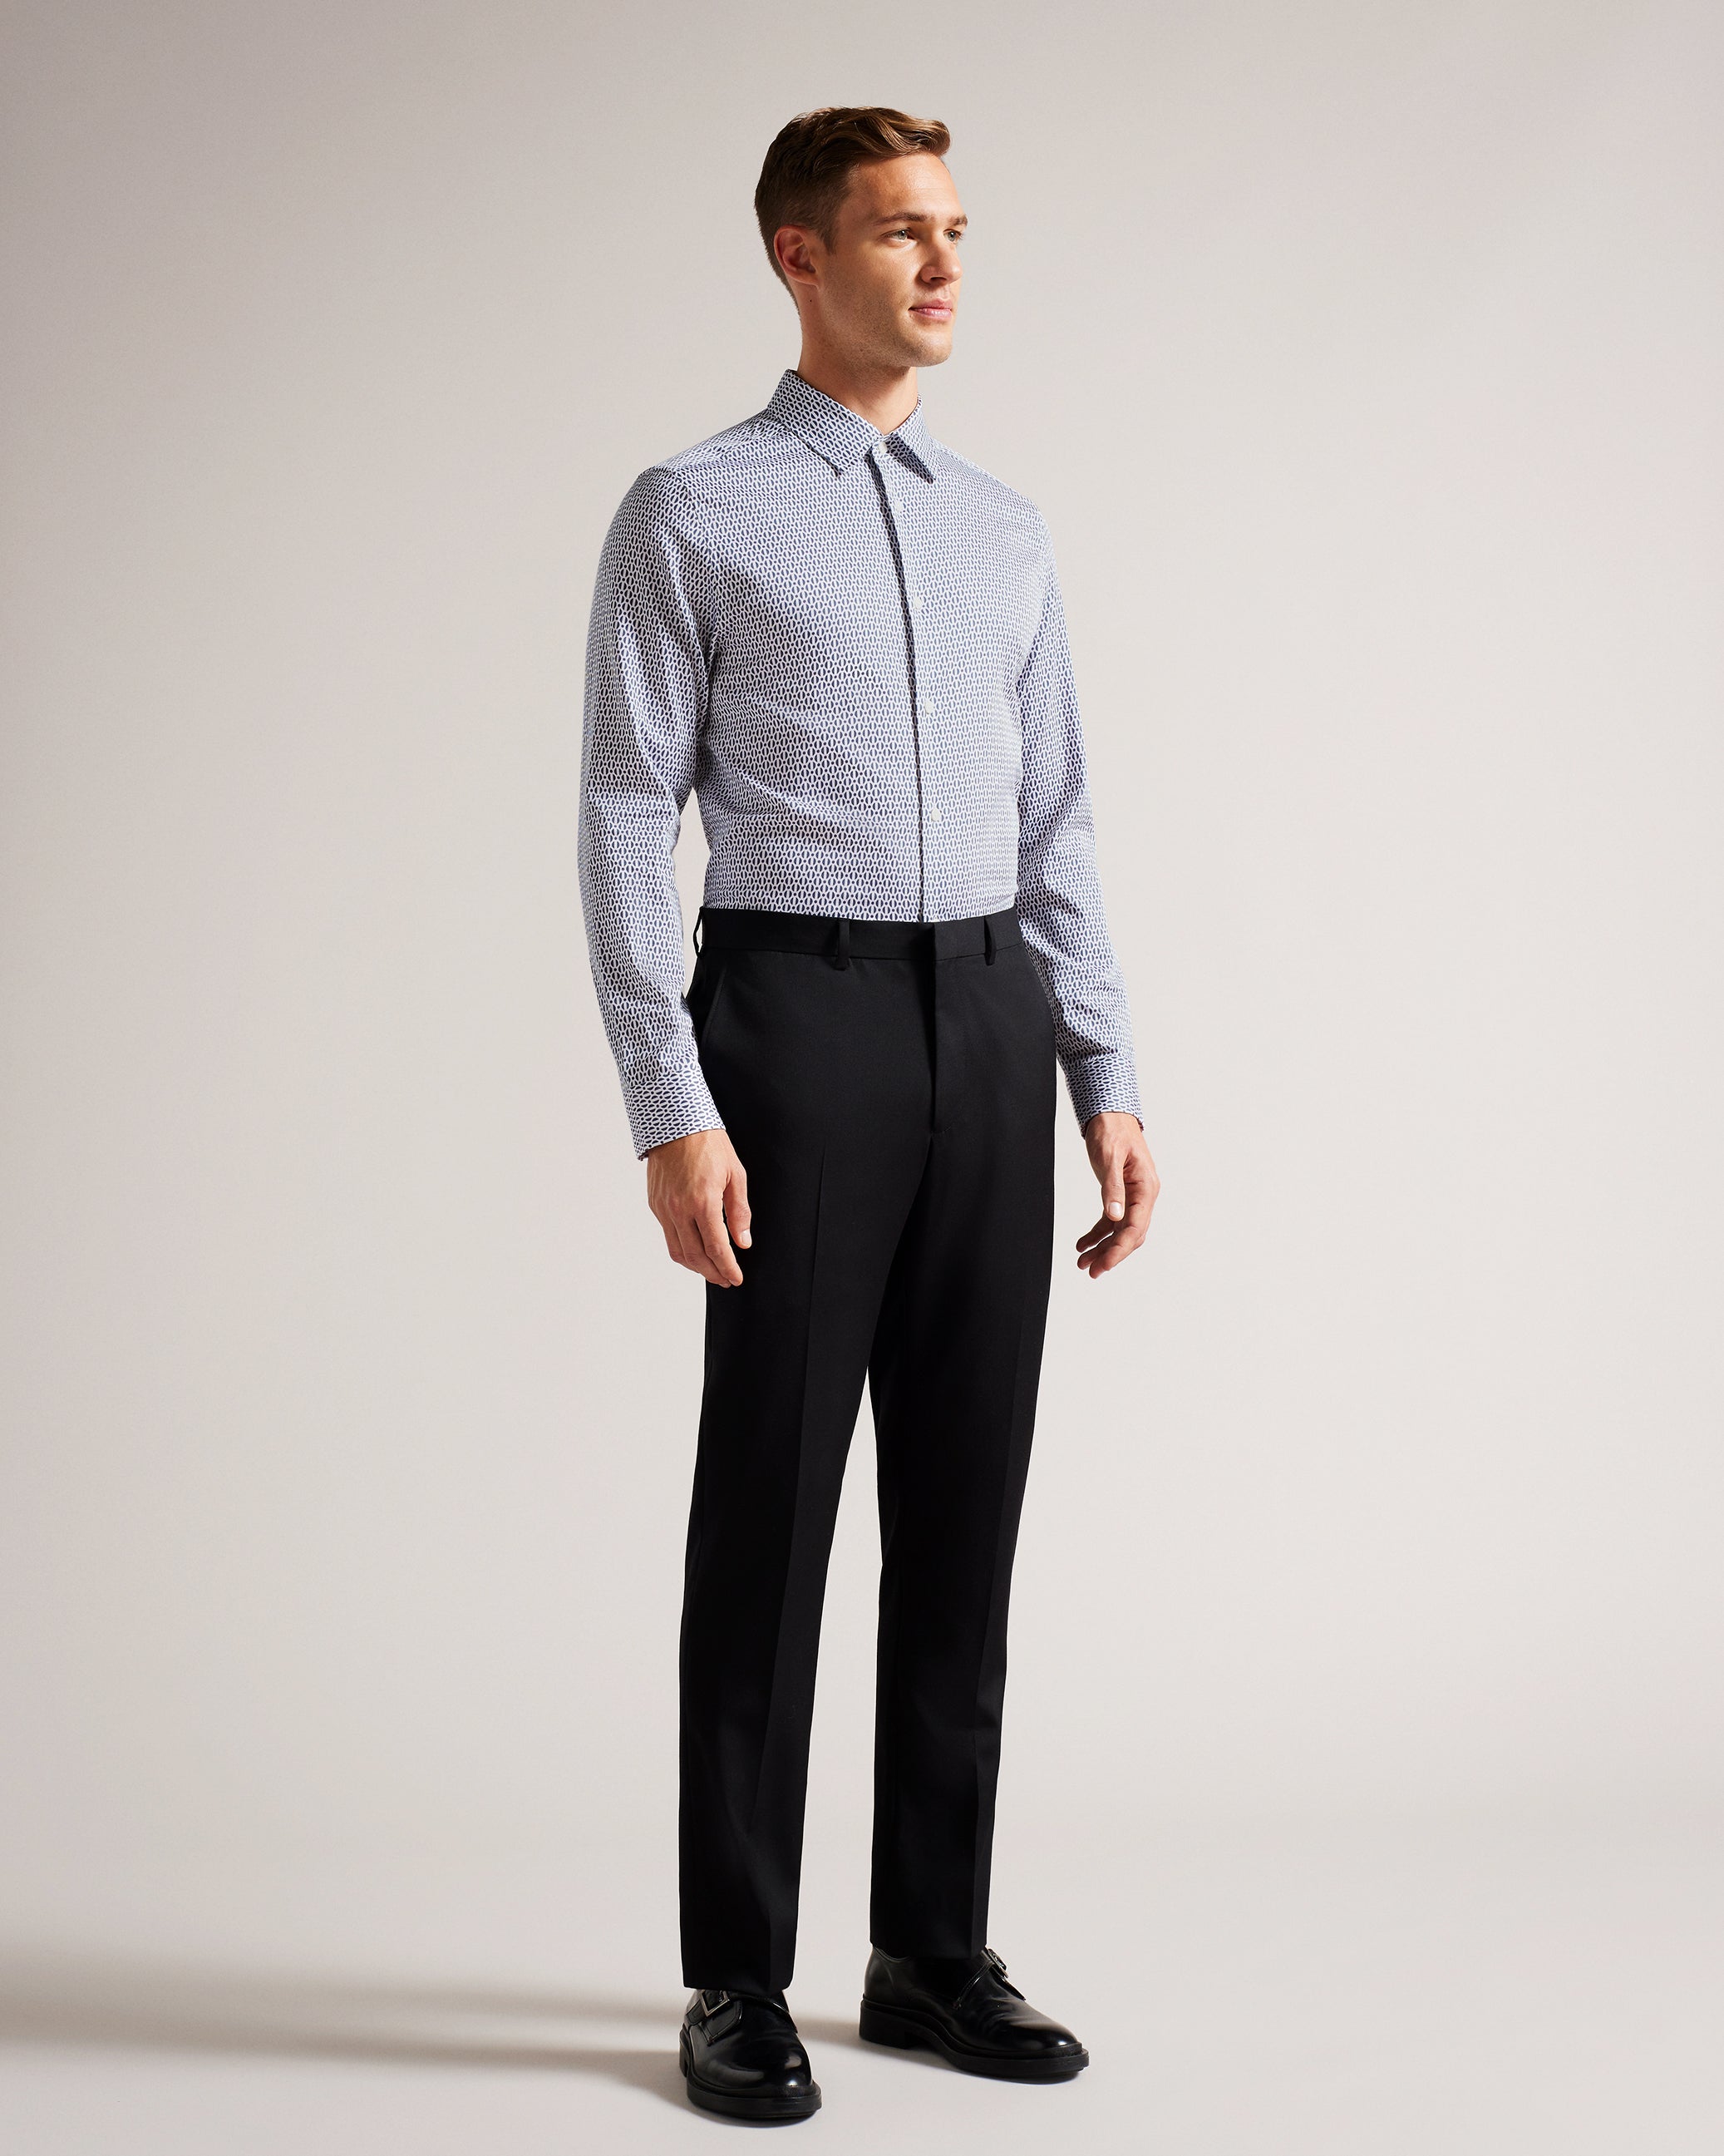 Men's Sale Shirts – Ted Baker, Canada